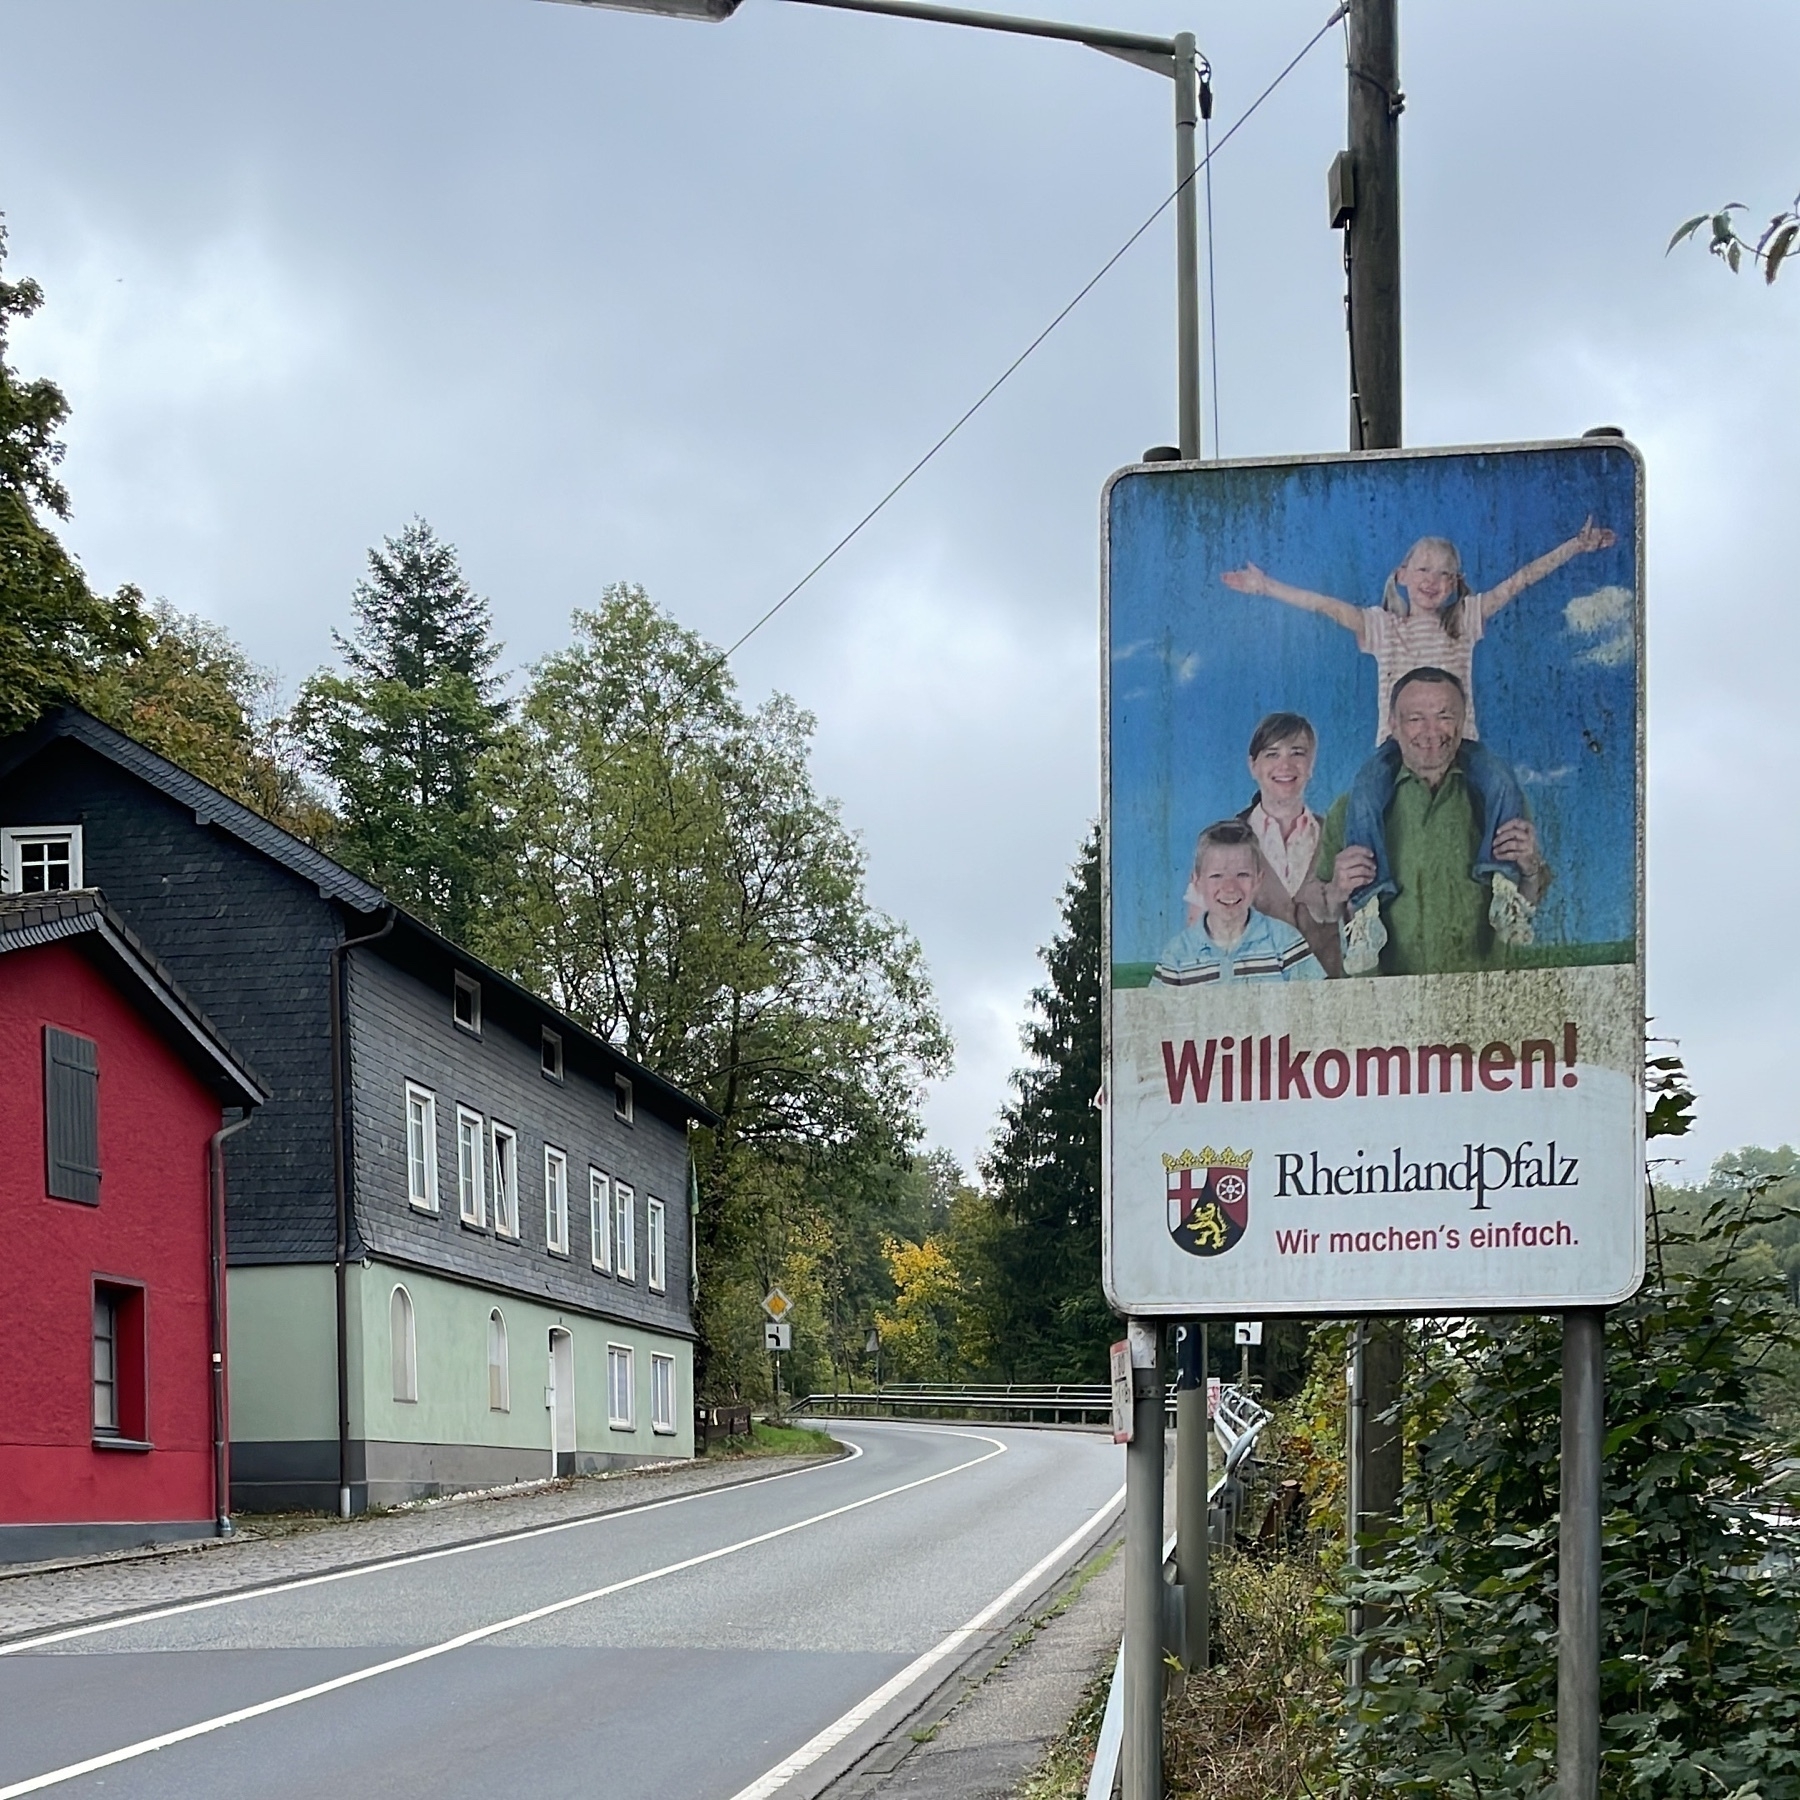 Willkommen Rheinland-Pfalz sign with a family and the slogan “wir machens einfach“ – “we just do it/we make it easy” wordplay. the red and black coat of arms is also shown.